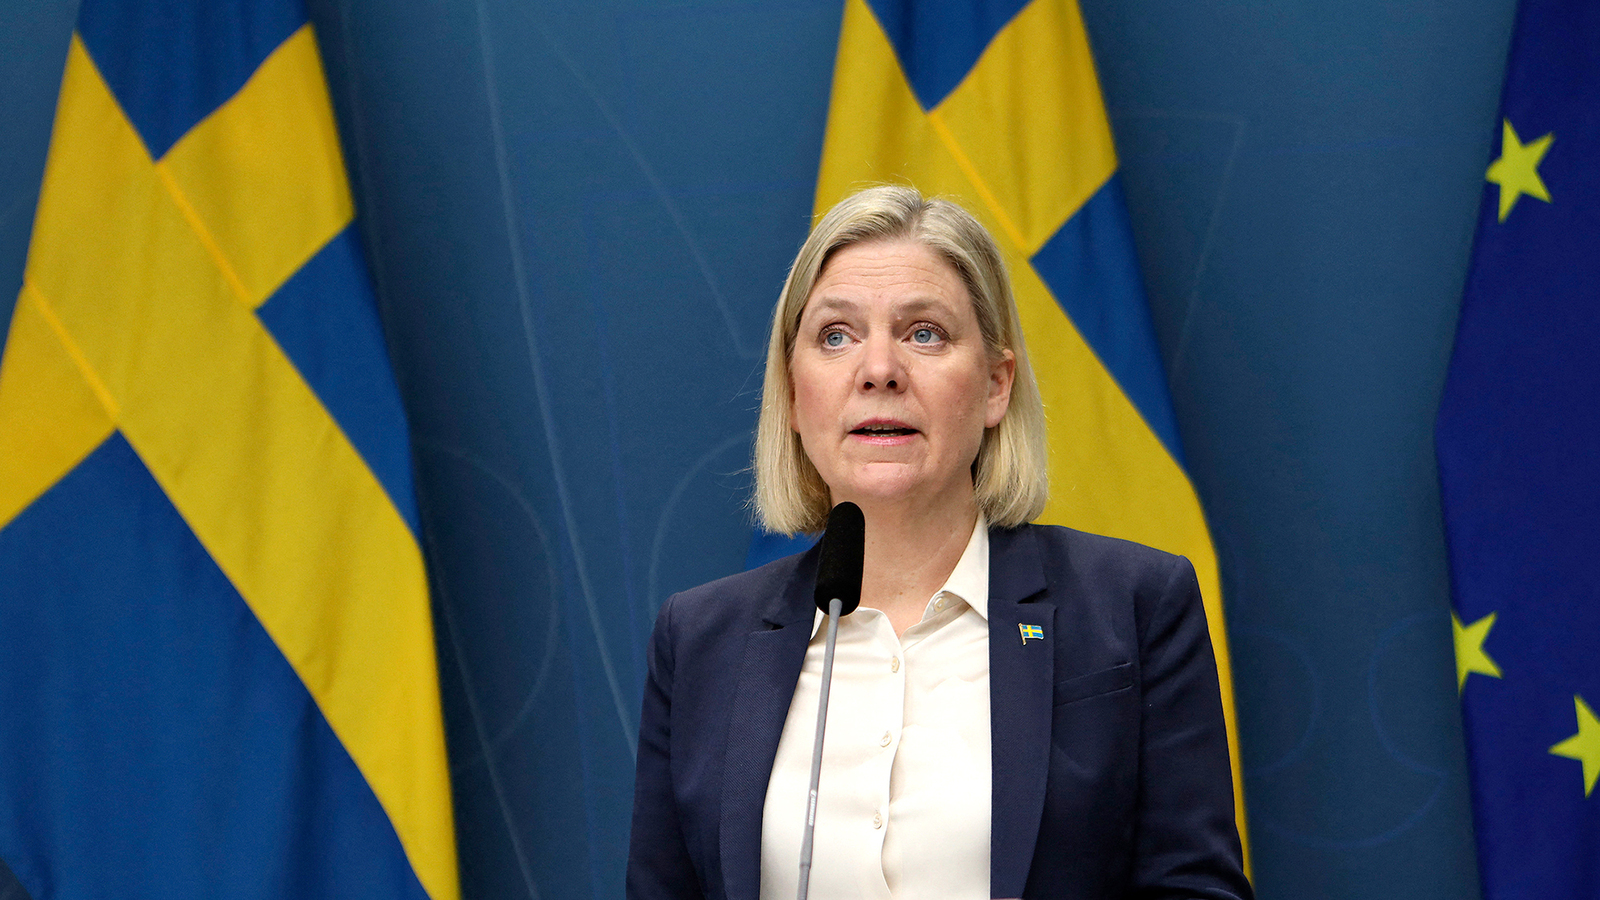 Sweden announces it should "work toward" an application for NATO membership